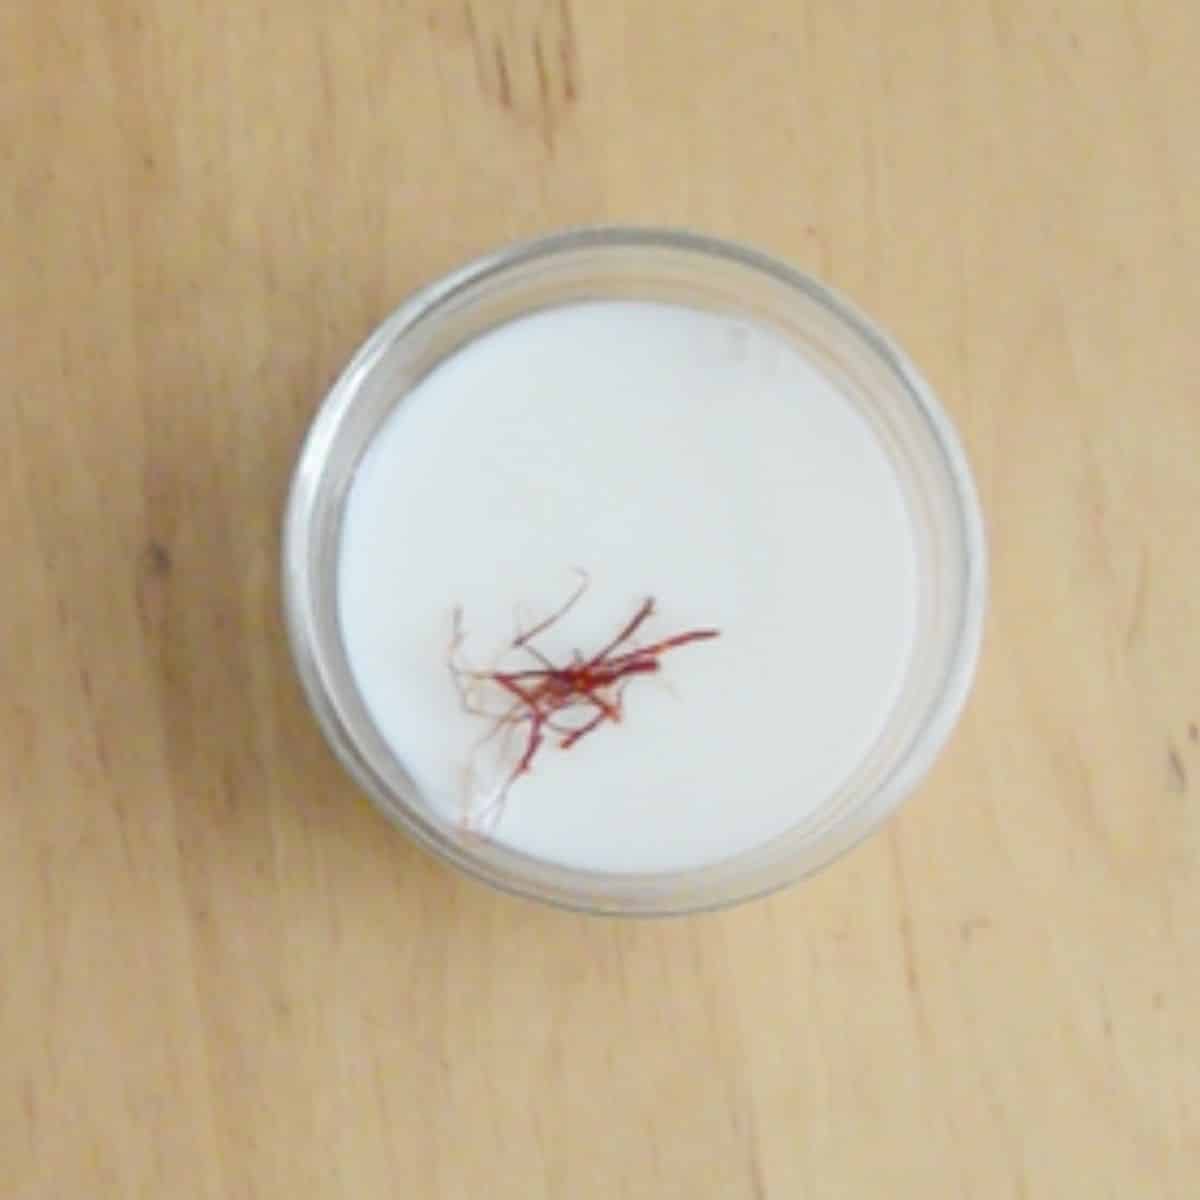 saffron strands in a cup of milk placed on wooden table.